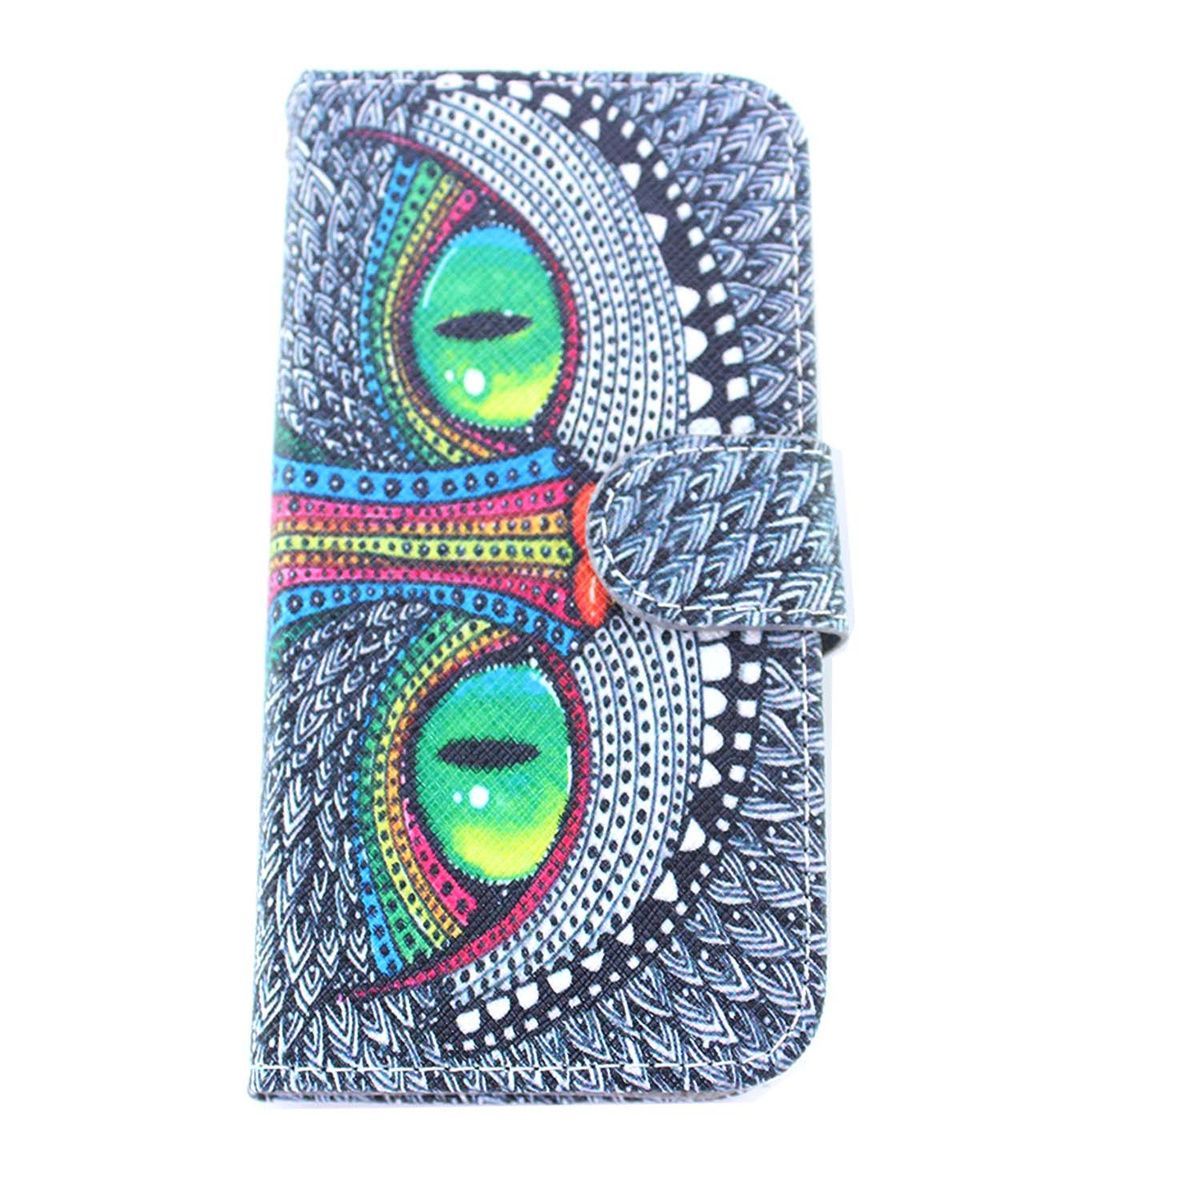 Eagle Eye Pattern Flip-open PU Leather Case w/ Stand / Card Slots for Samsung Galaxy S5 Mini